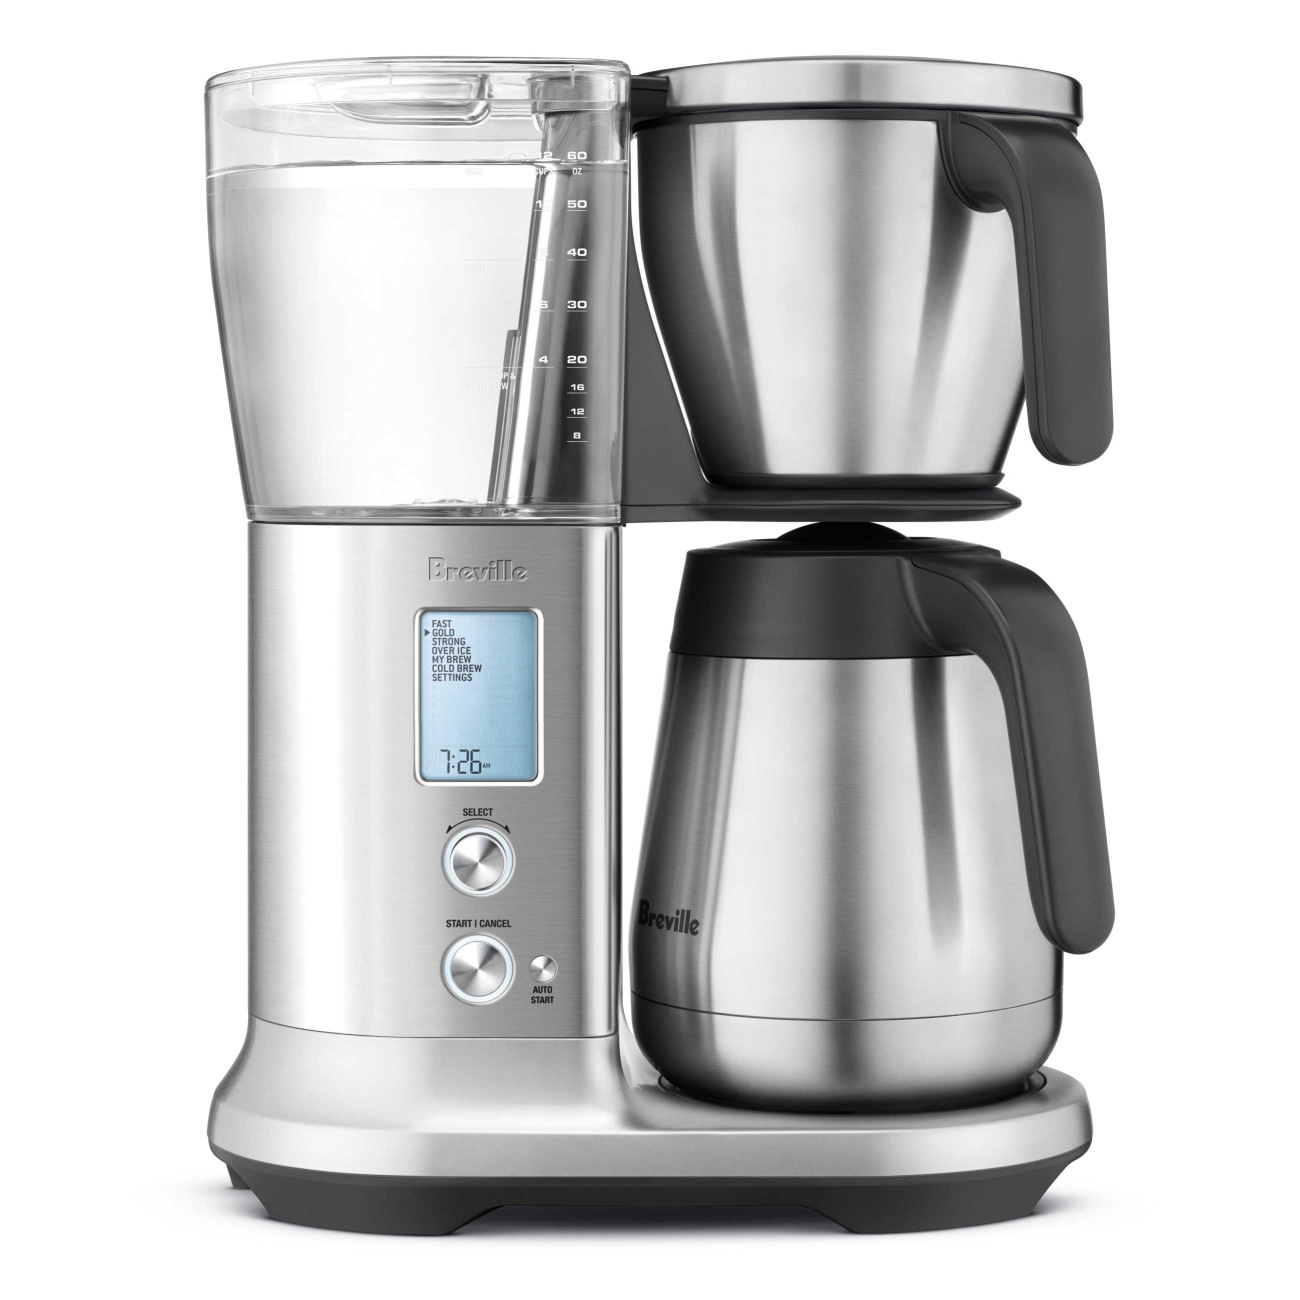 Thermal Coffee Maker7.1